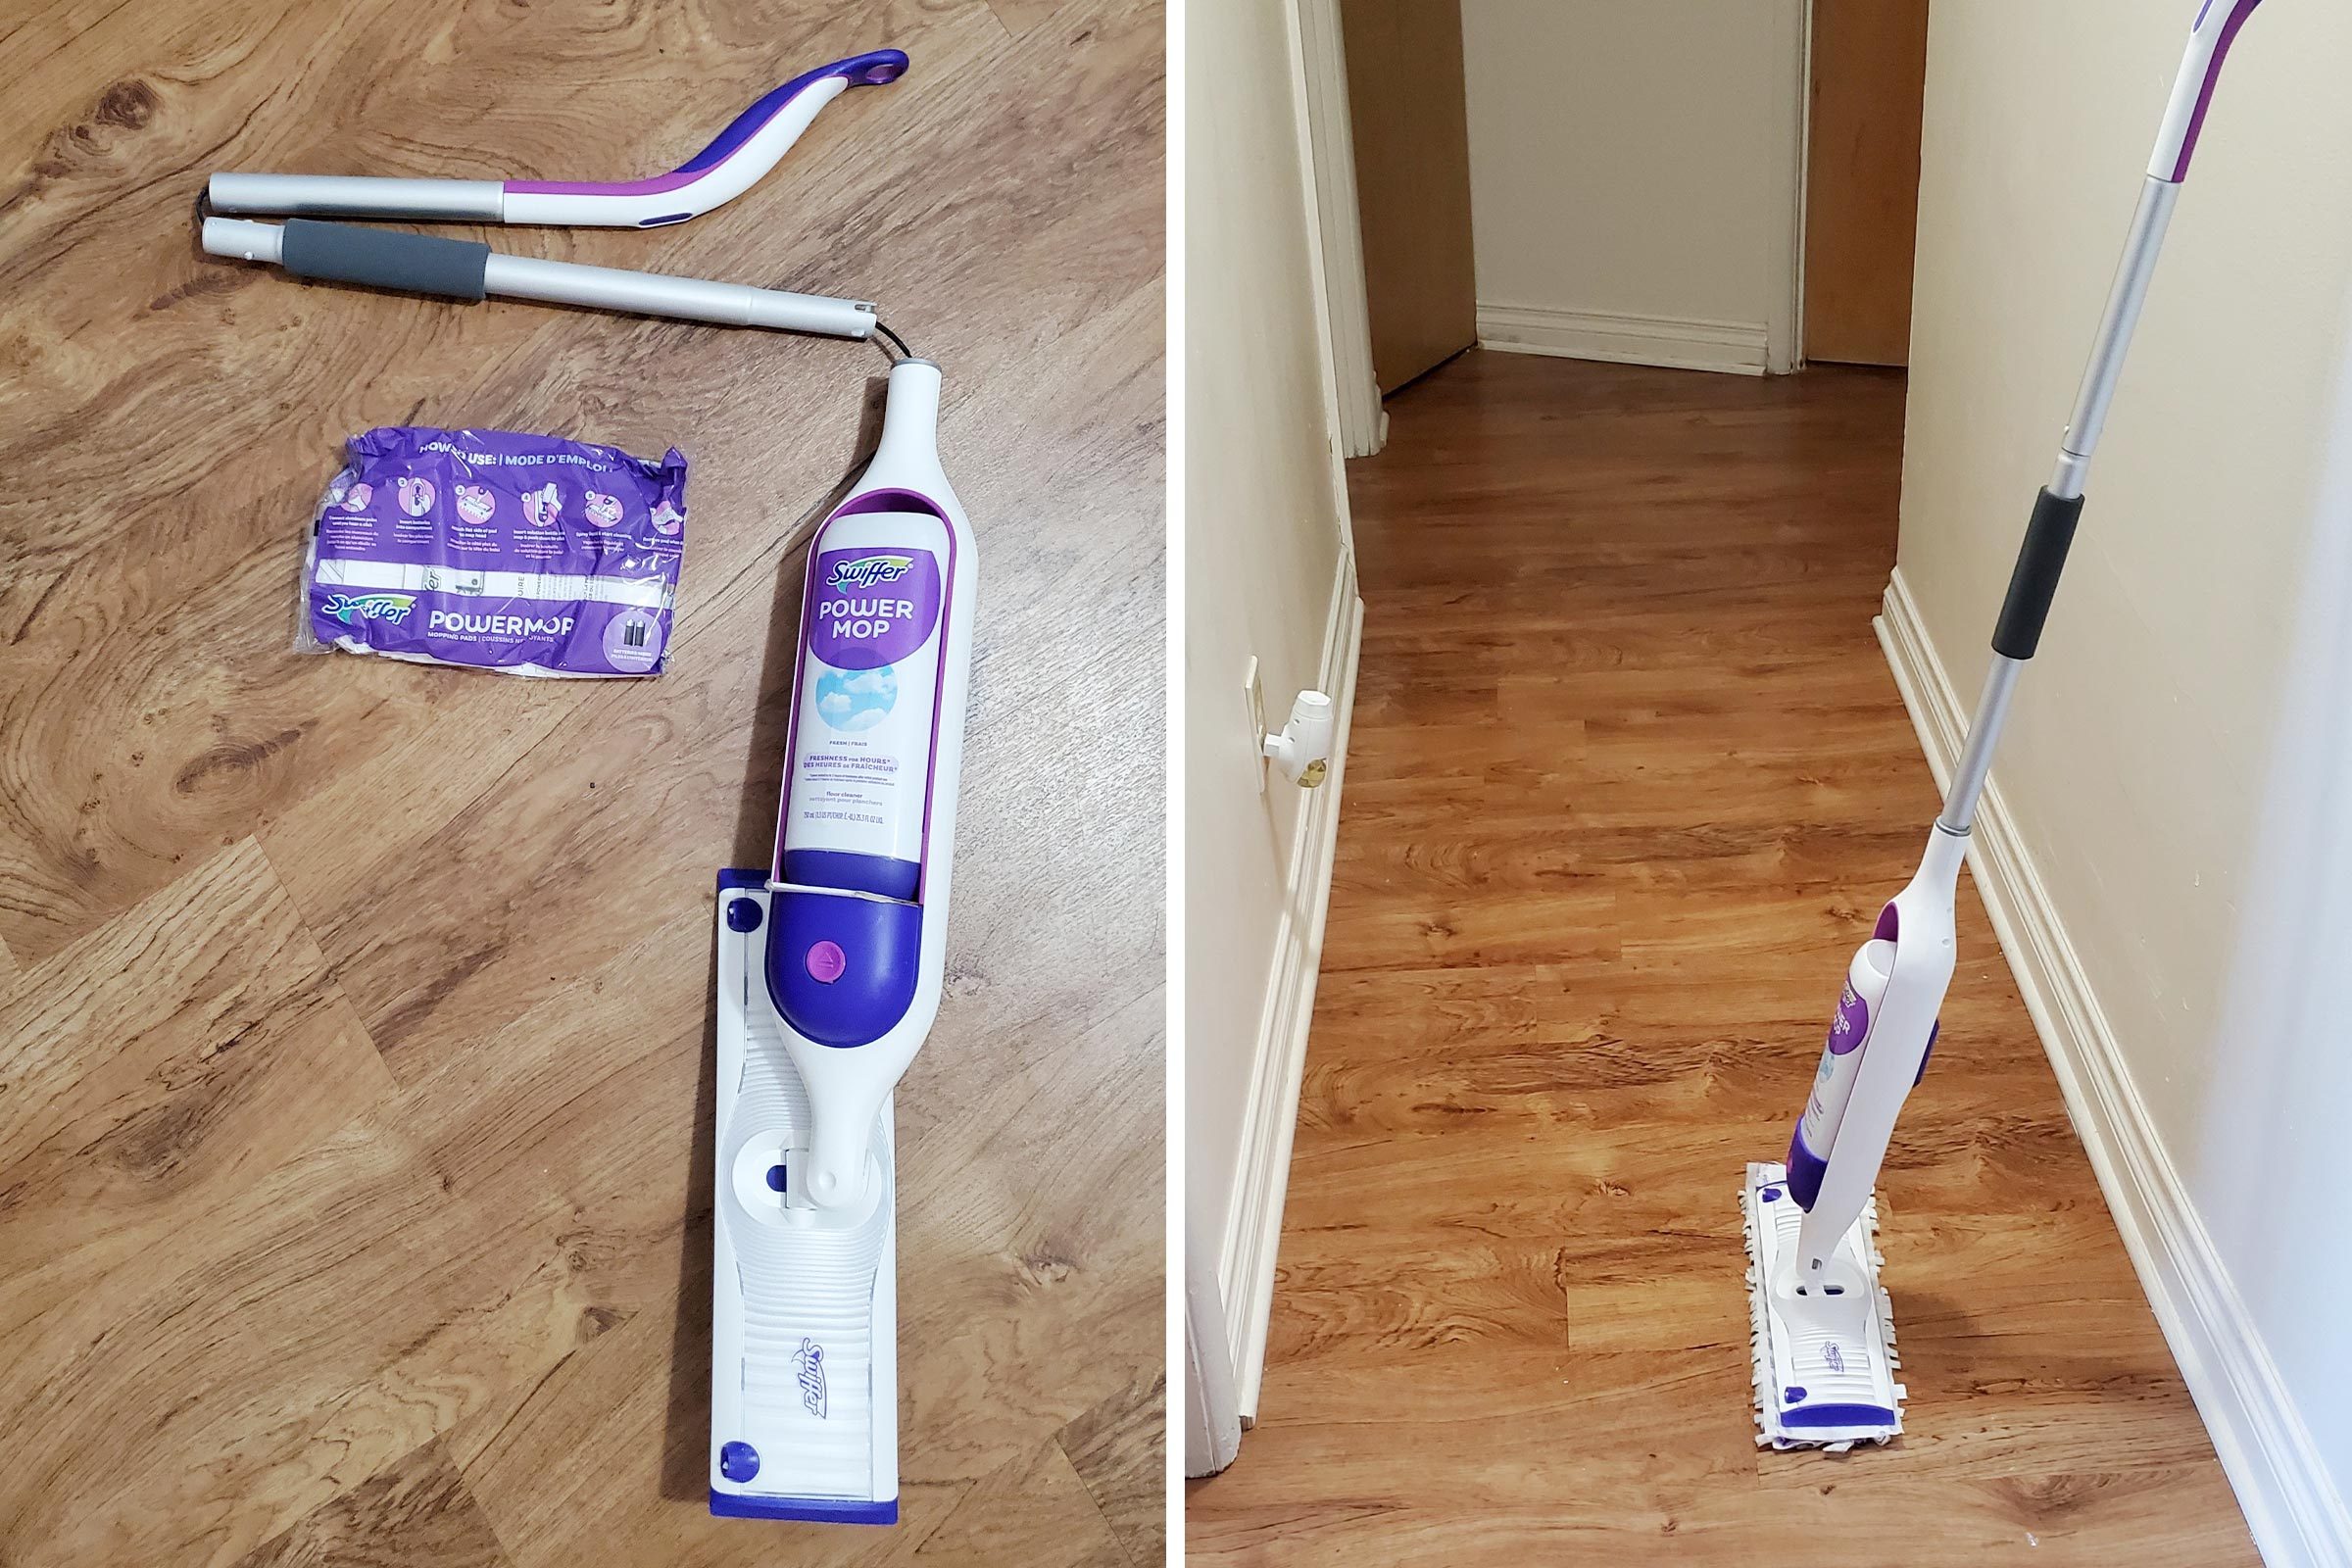 The New Swiffer PowerMop Helps You Mop Smarter So You Can Say